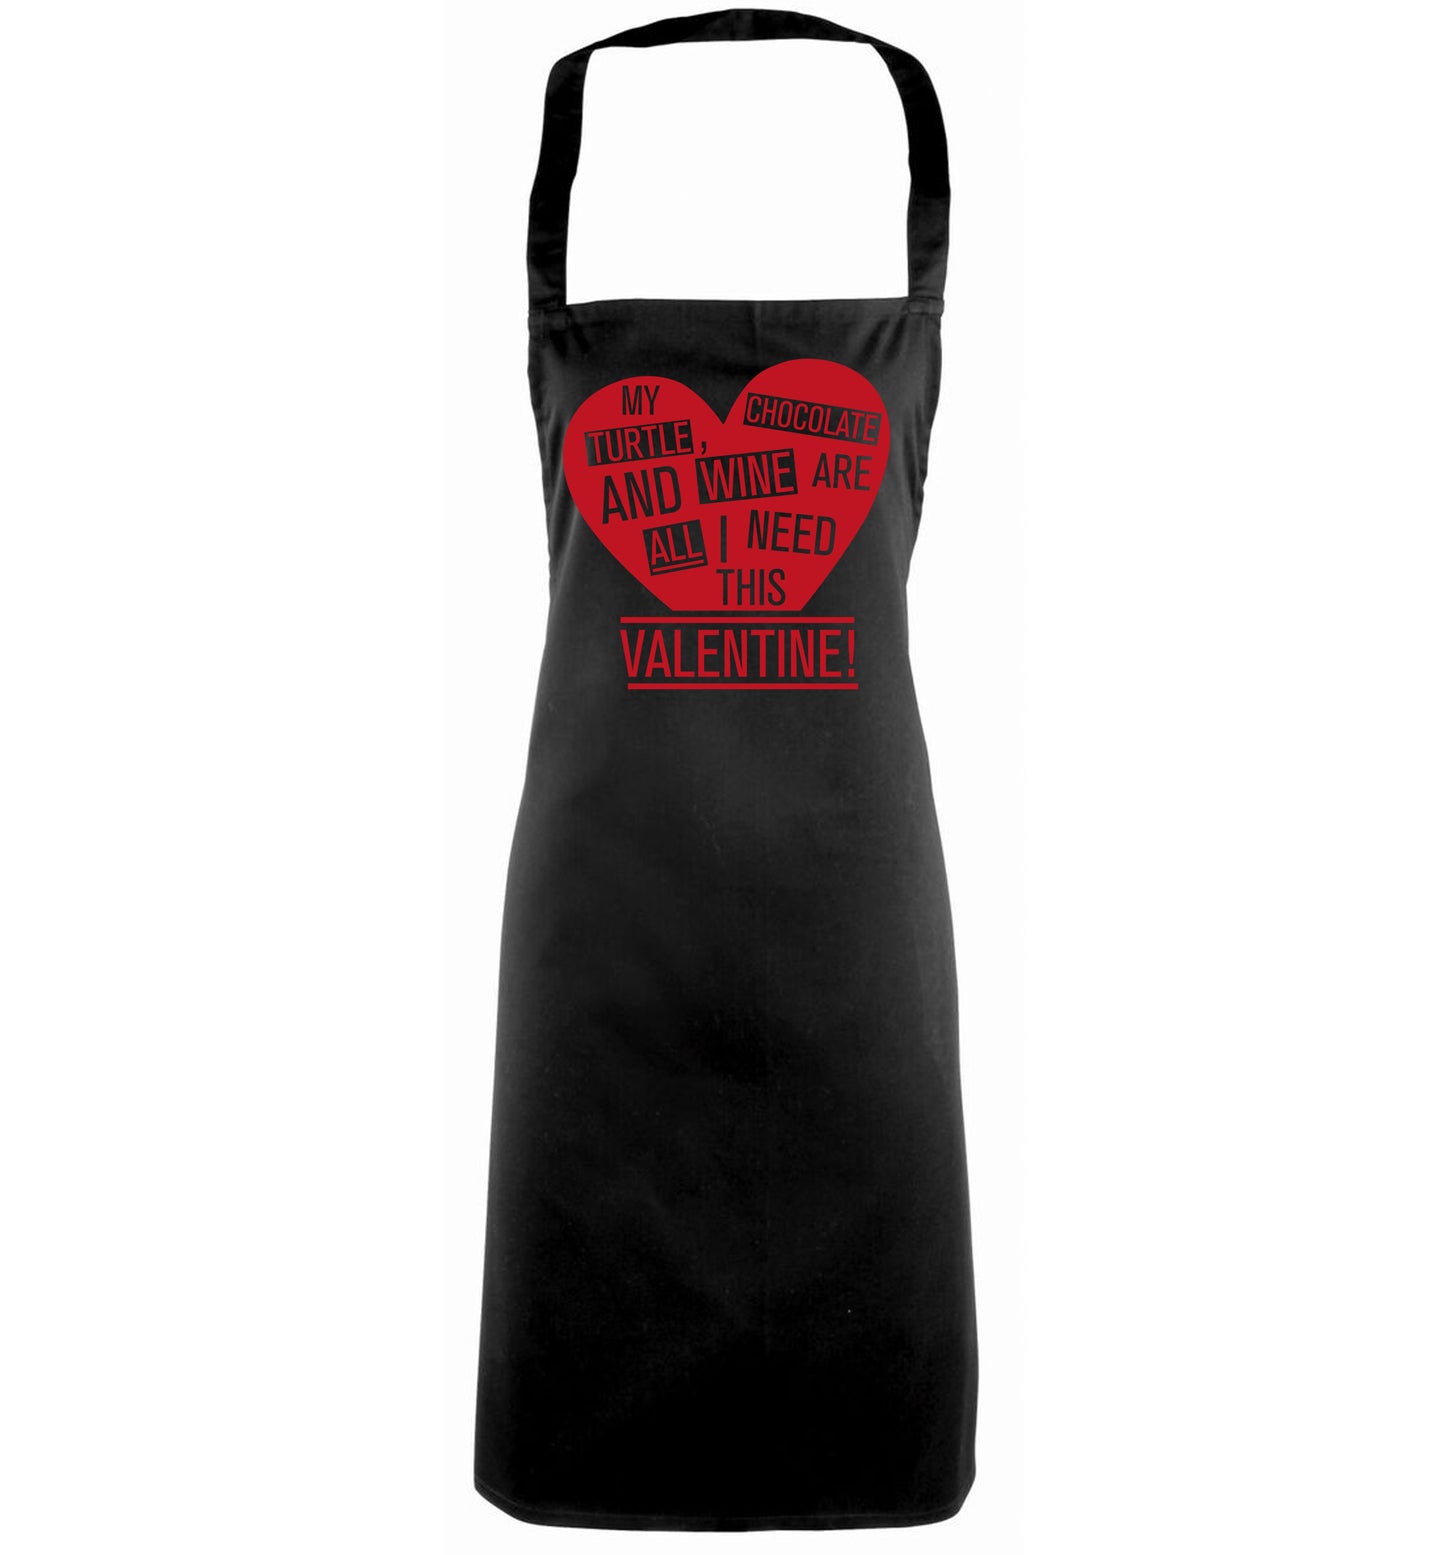 My turtle, chocolate and wine are all I need this valentine! black apron